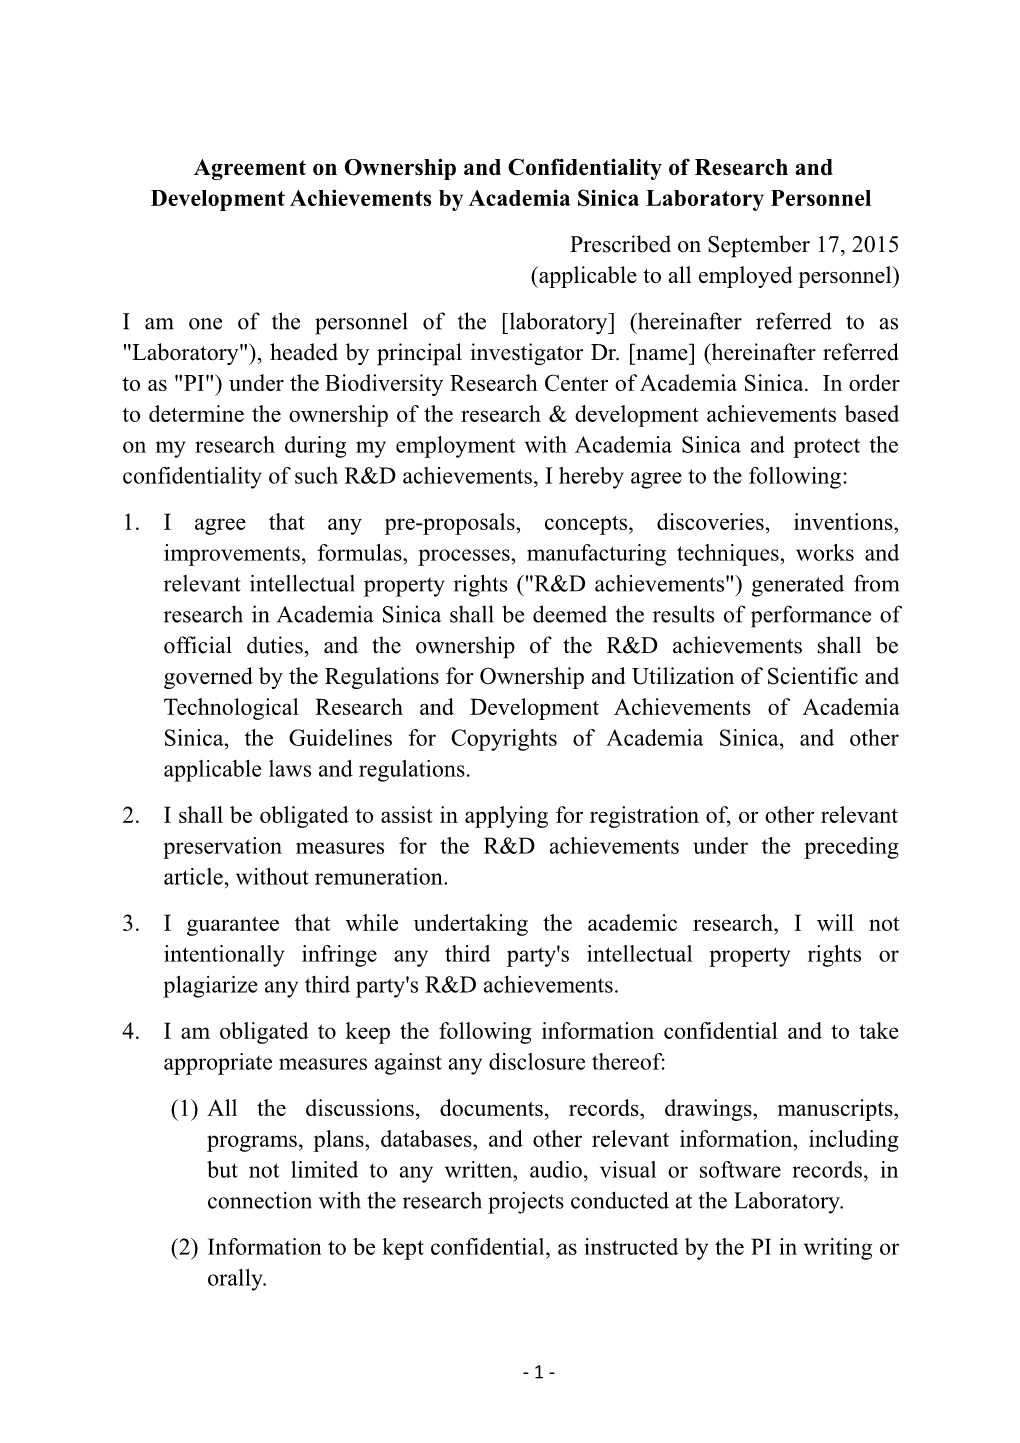 Agreement on Ownership and Confidentiality of Research and Development Achievementsbyacademia